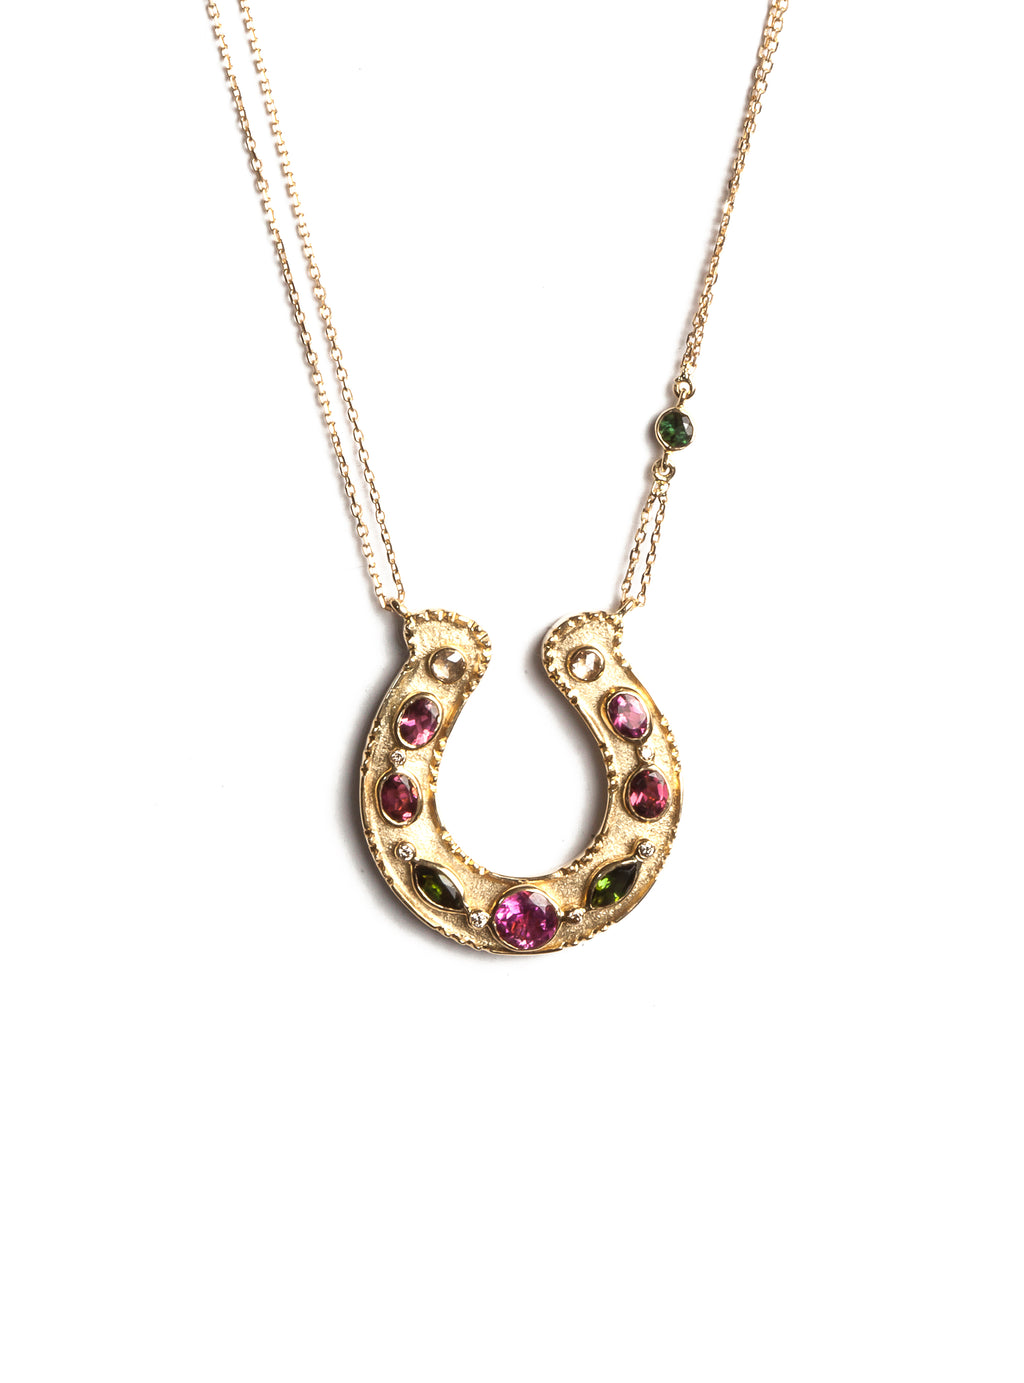 Horseshoe Necklace with Multicolored Tourmalines and Diamonds